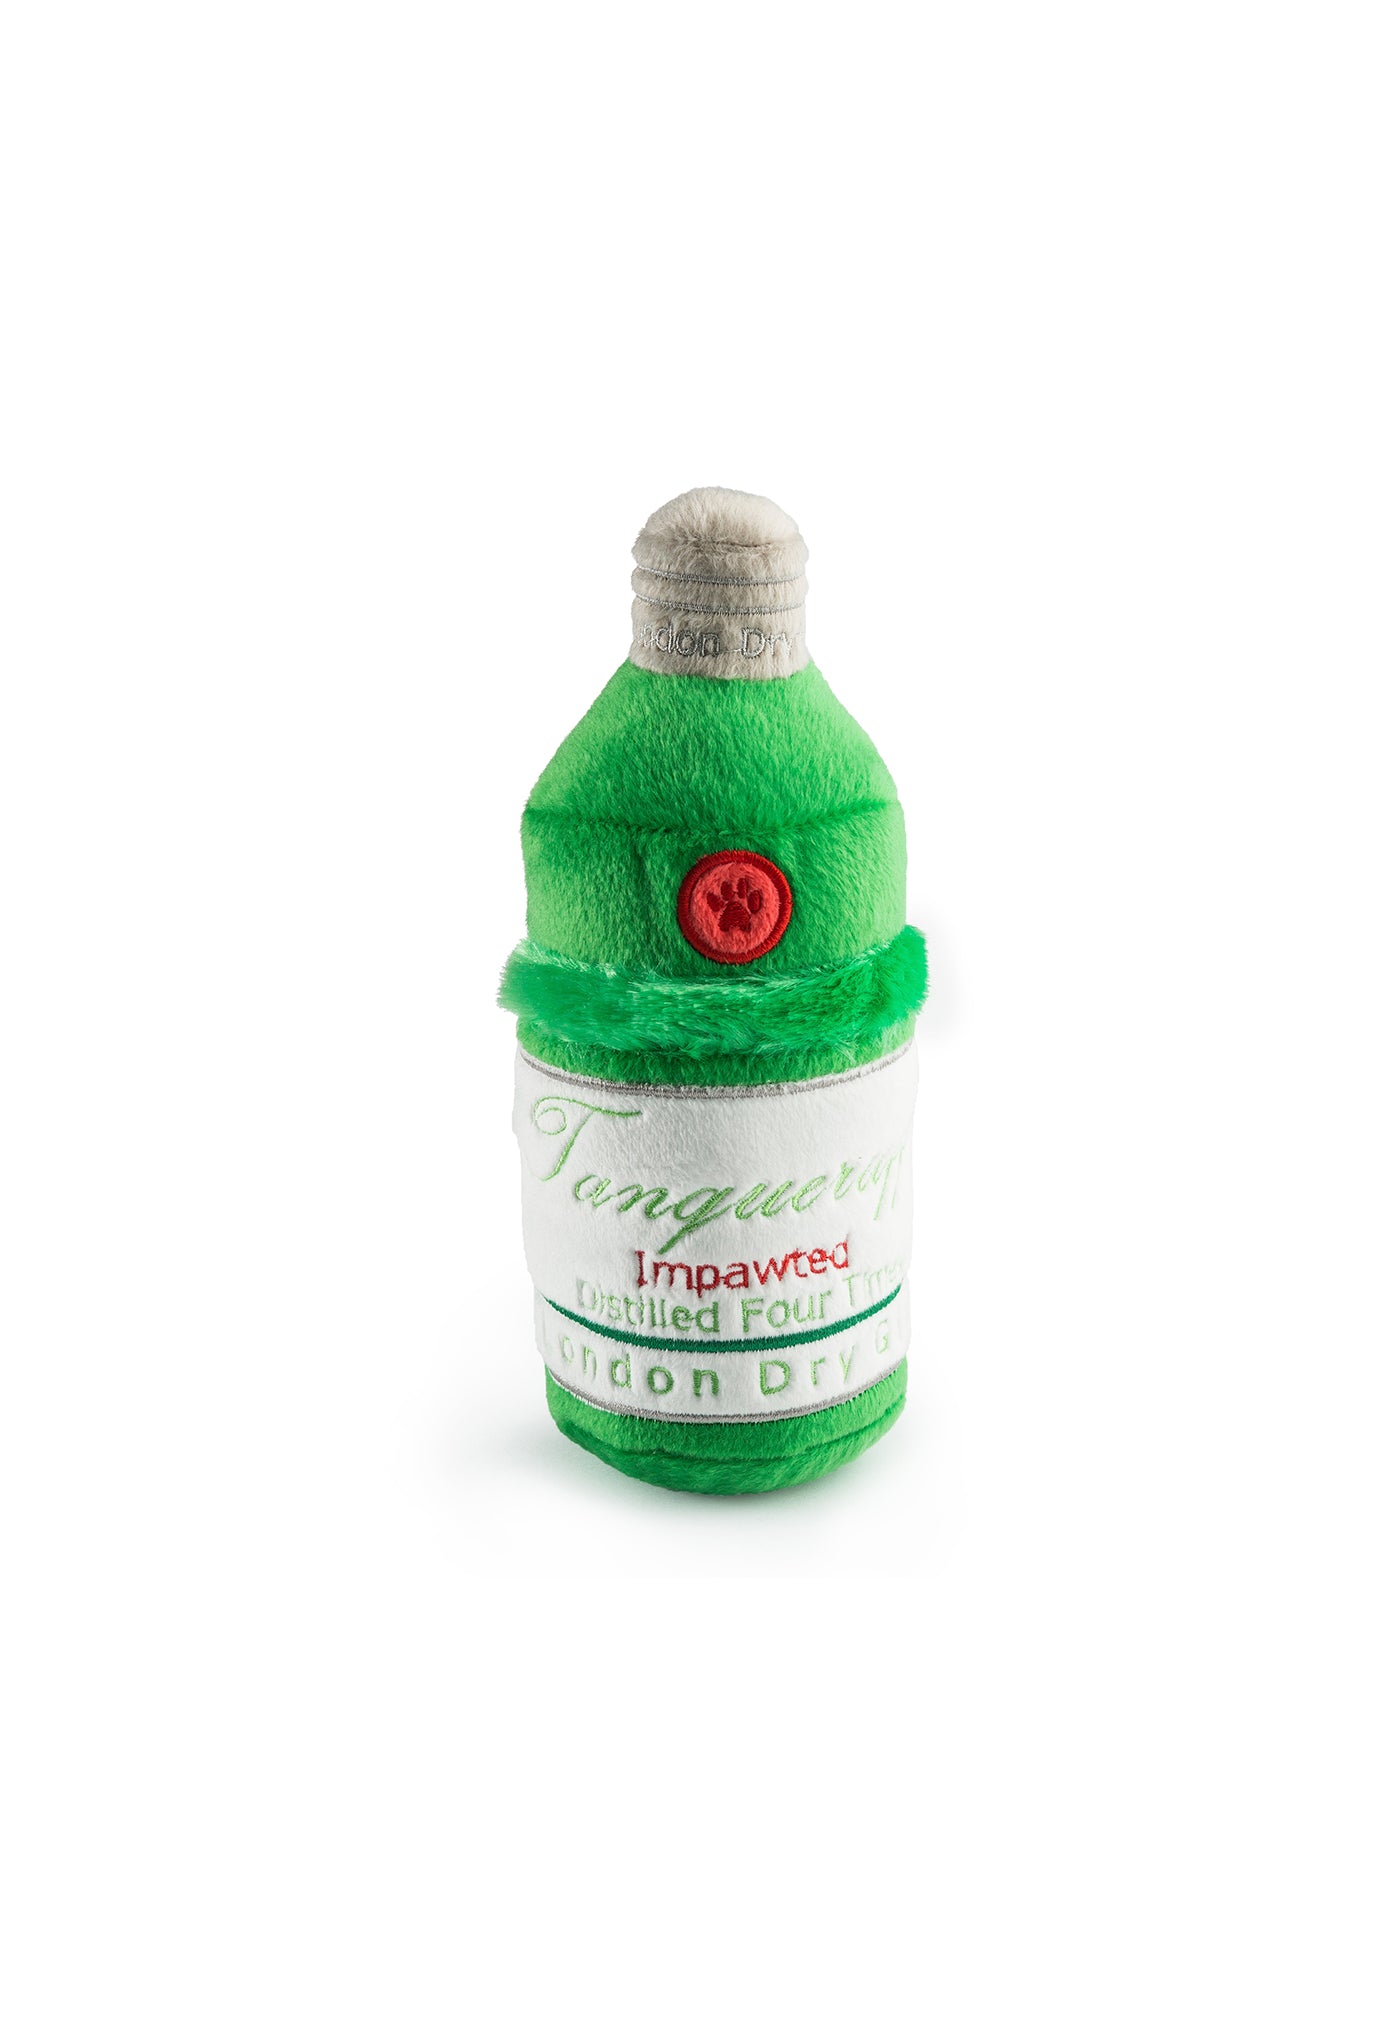 Tanqueruff Gin Plush Toy sold by Angel Divine